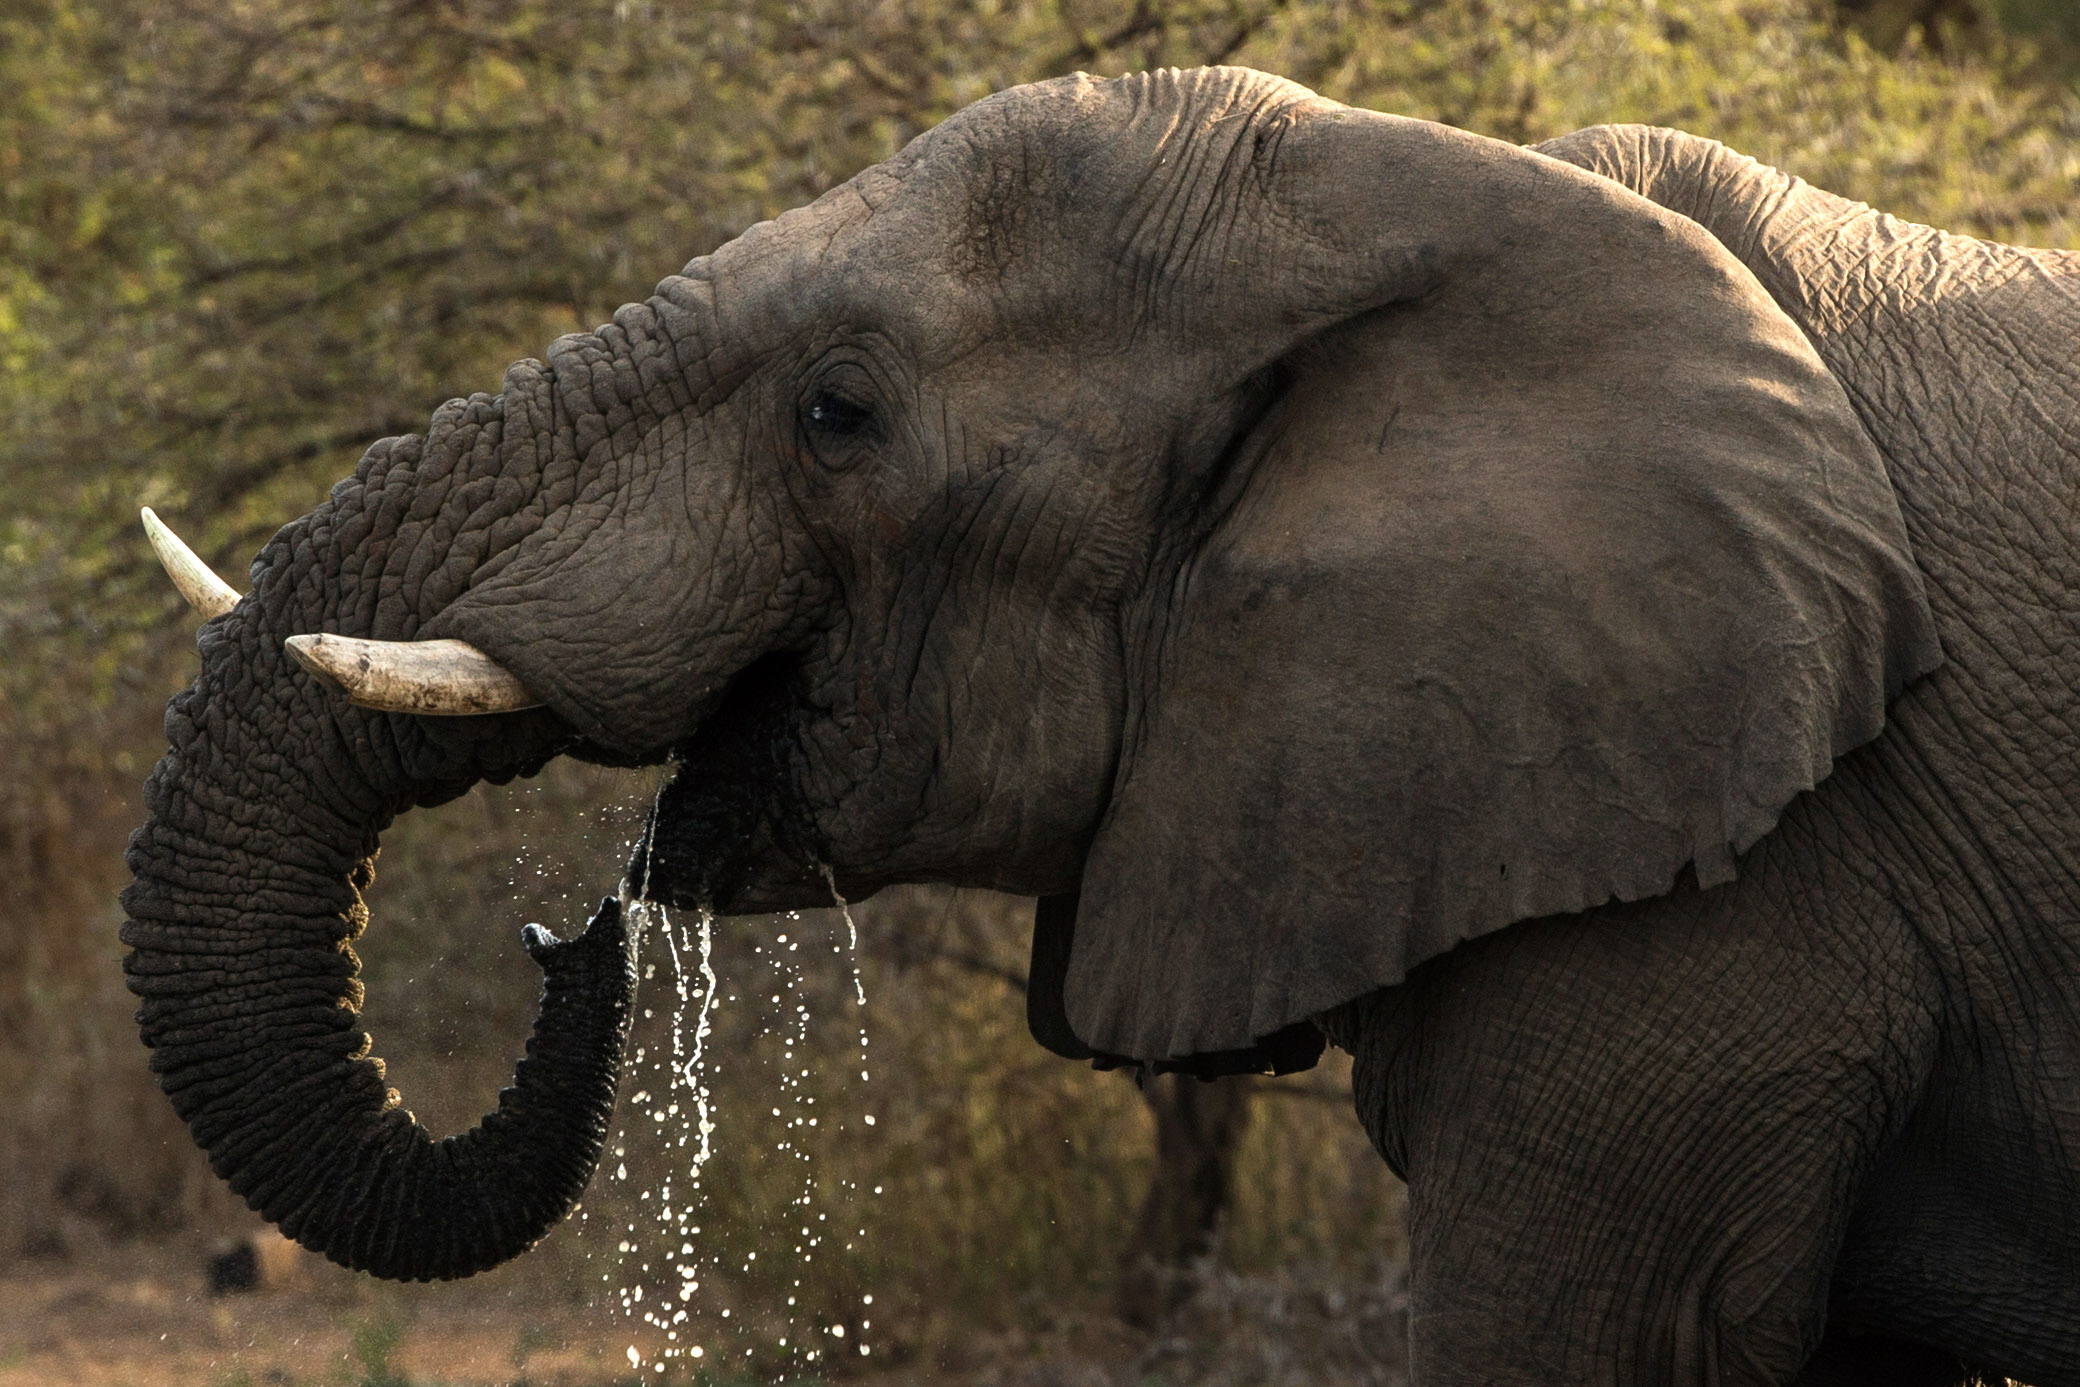 LOWER SABIE, SOUTH AFRICA - JULY 08: An African Elephant drinks water from a pool in Krugar National Park on July 8, 2013 in Lower Sabie, South Africa. The Kruger National Park was established in 1898, and is South Africa's premier wildlife park, spanning an area of approximately 2 million hectares. (Photo by Dan Kitwood/Getty Images)